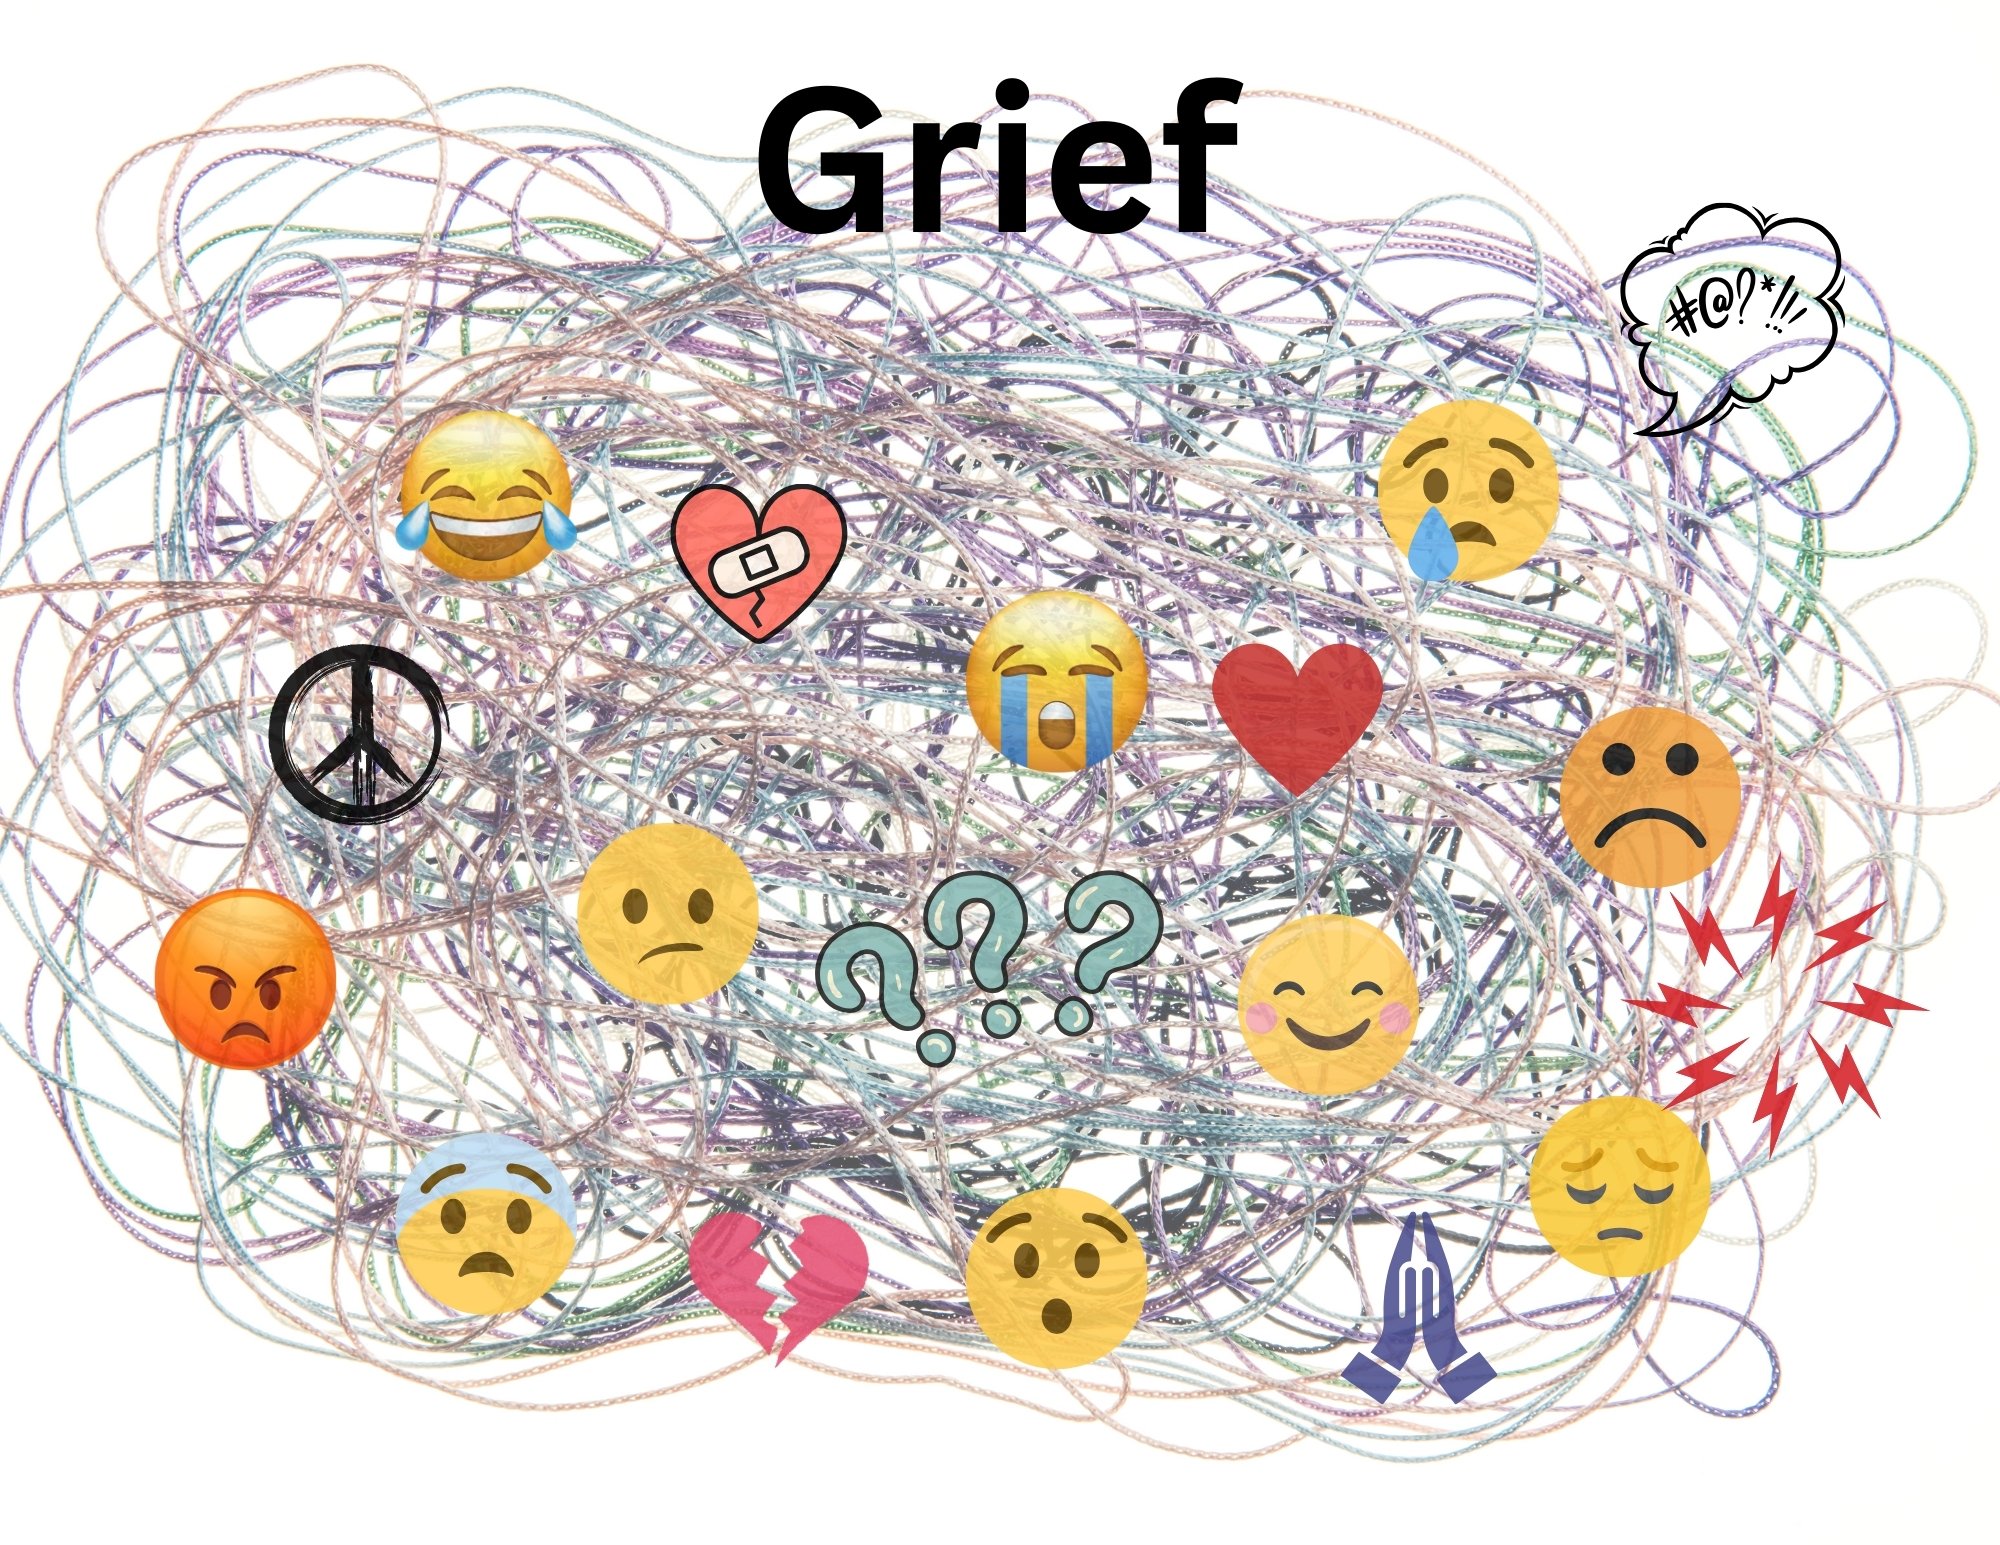 Swirls of chaos with pictures of different emotions and experiences to reflect the complexity of grief